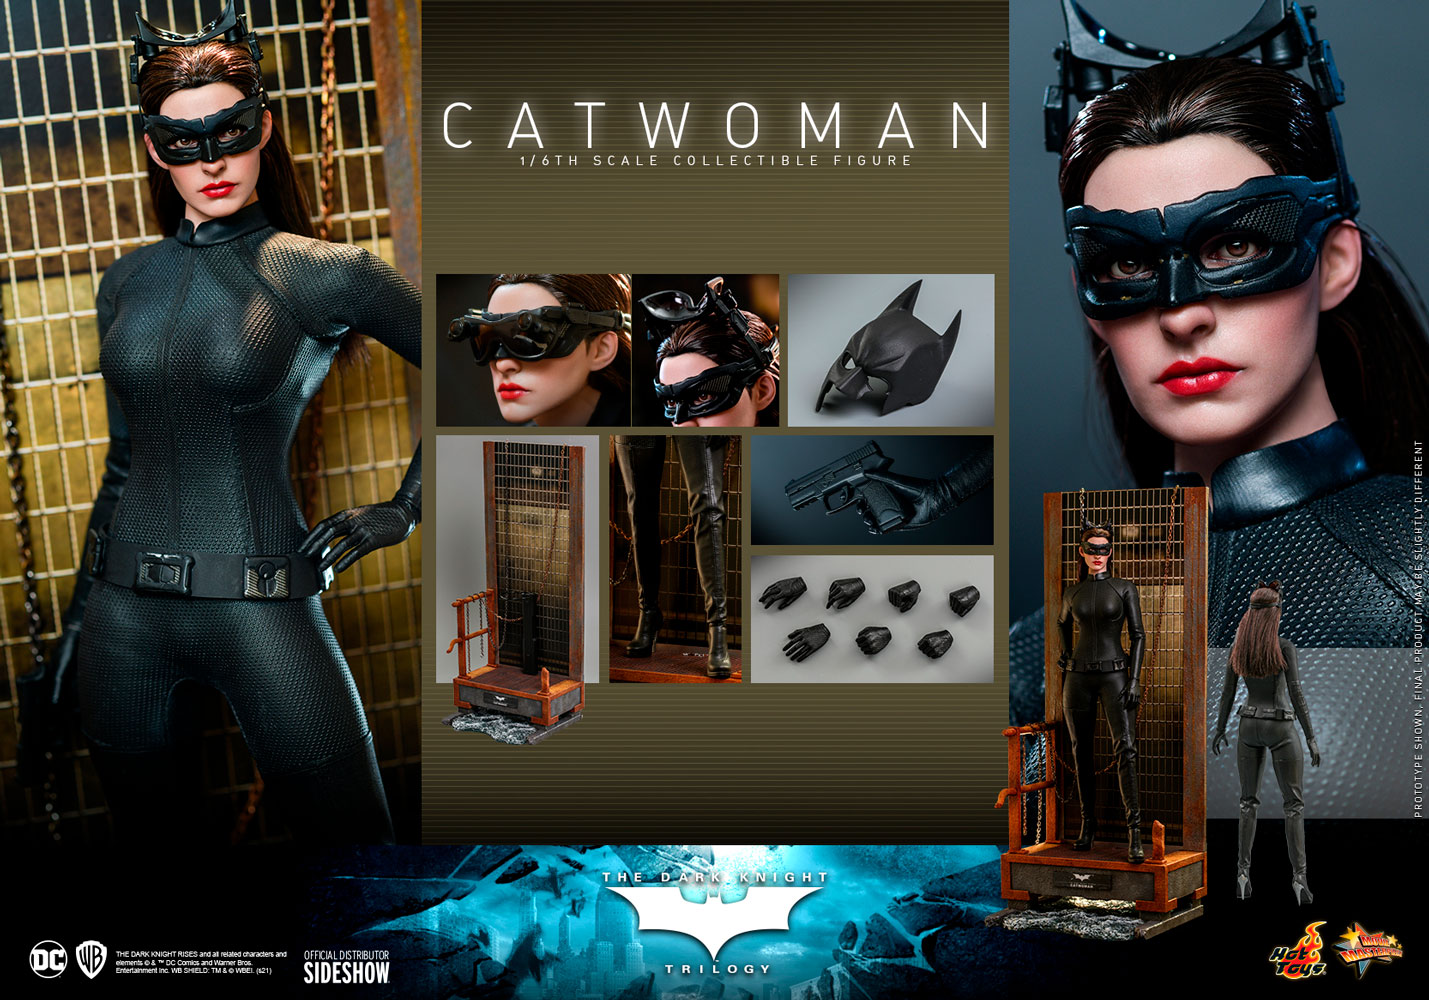 Hot Toys The Dark Knight Trilogy Catwoman